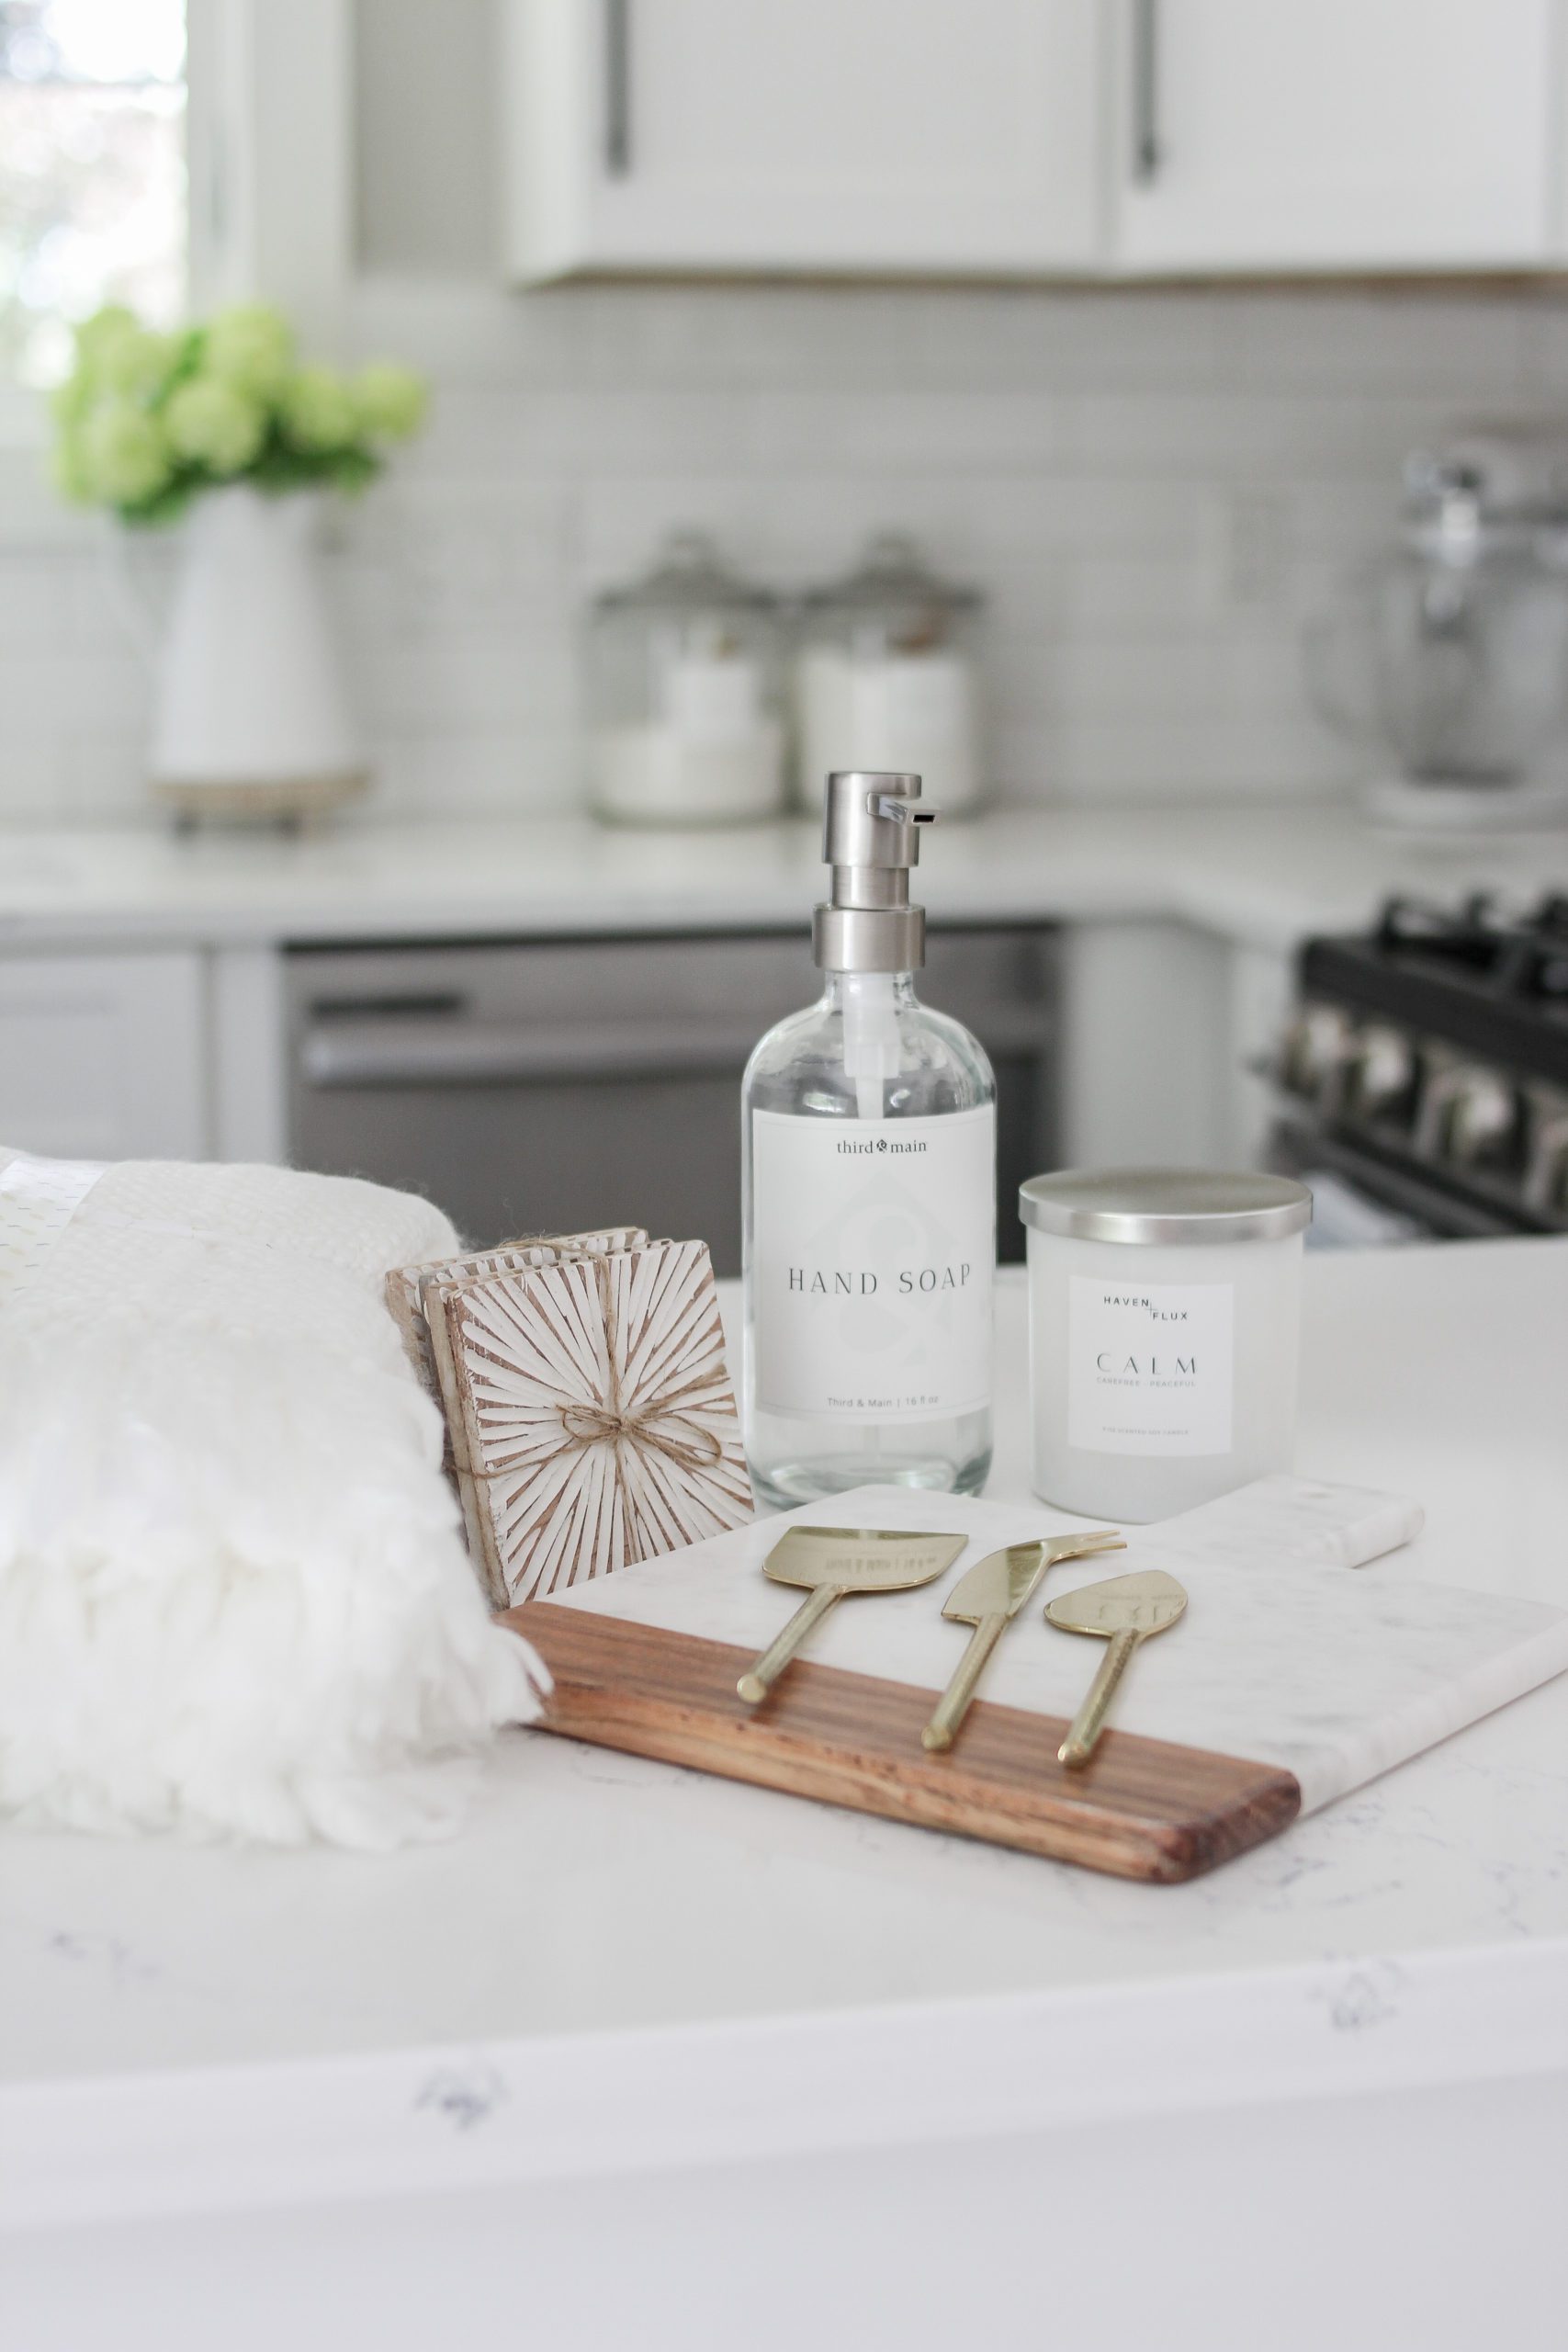 for the decor lover home decor box from third and main featuring a third & main hand soap bottle, haven + flux calm luxury candle, mango wood starburst coaster, cream knit tasseled throw, mango wood acacia and marble wood cutting board, golden cheese knife set